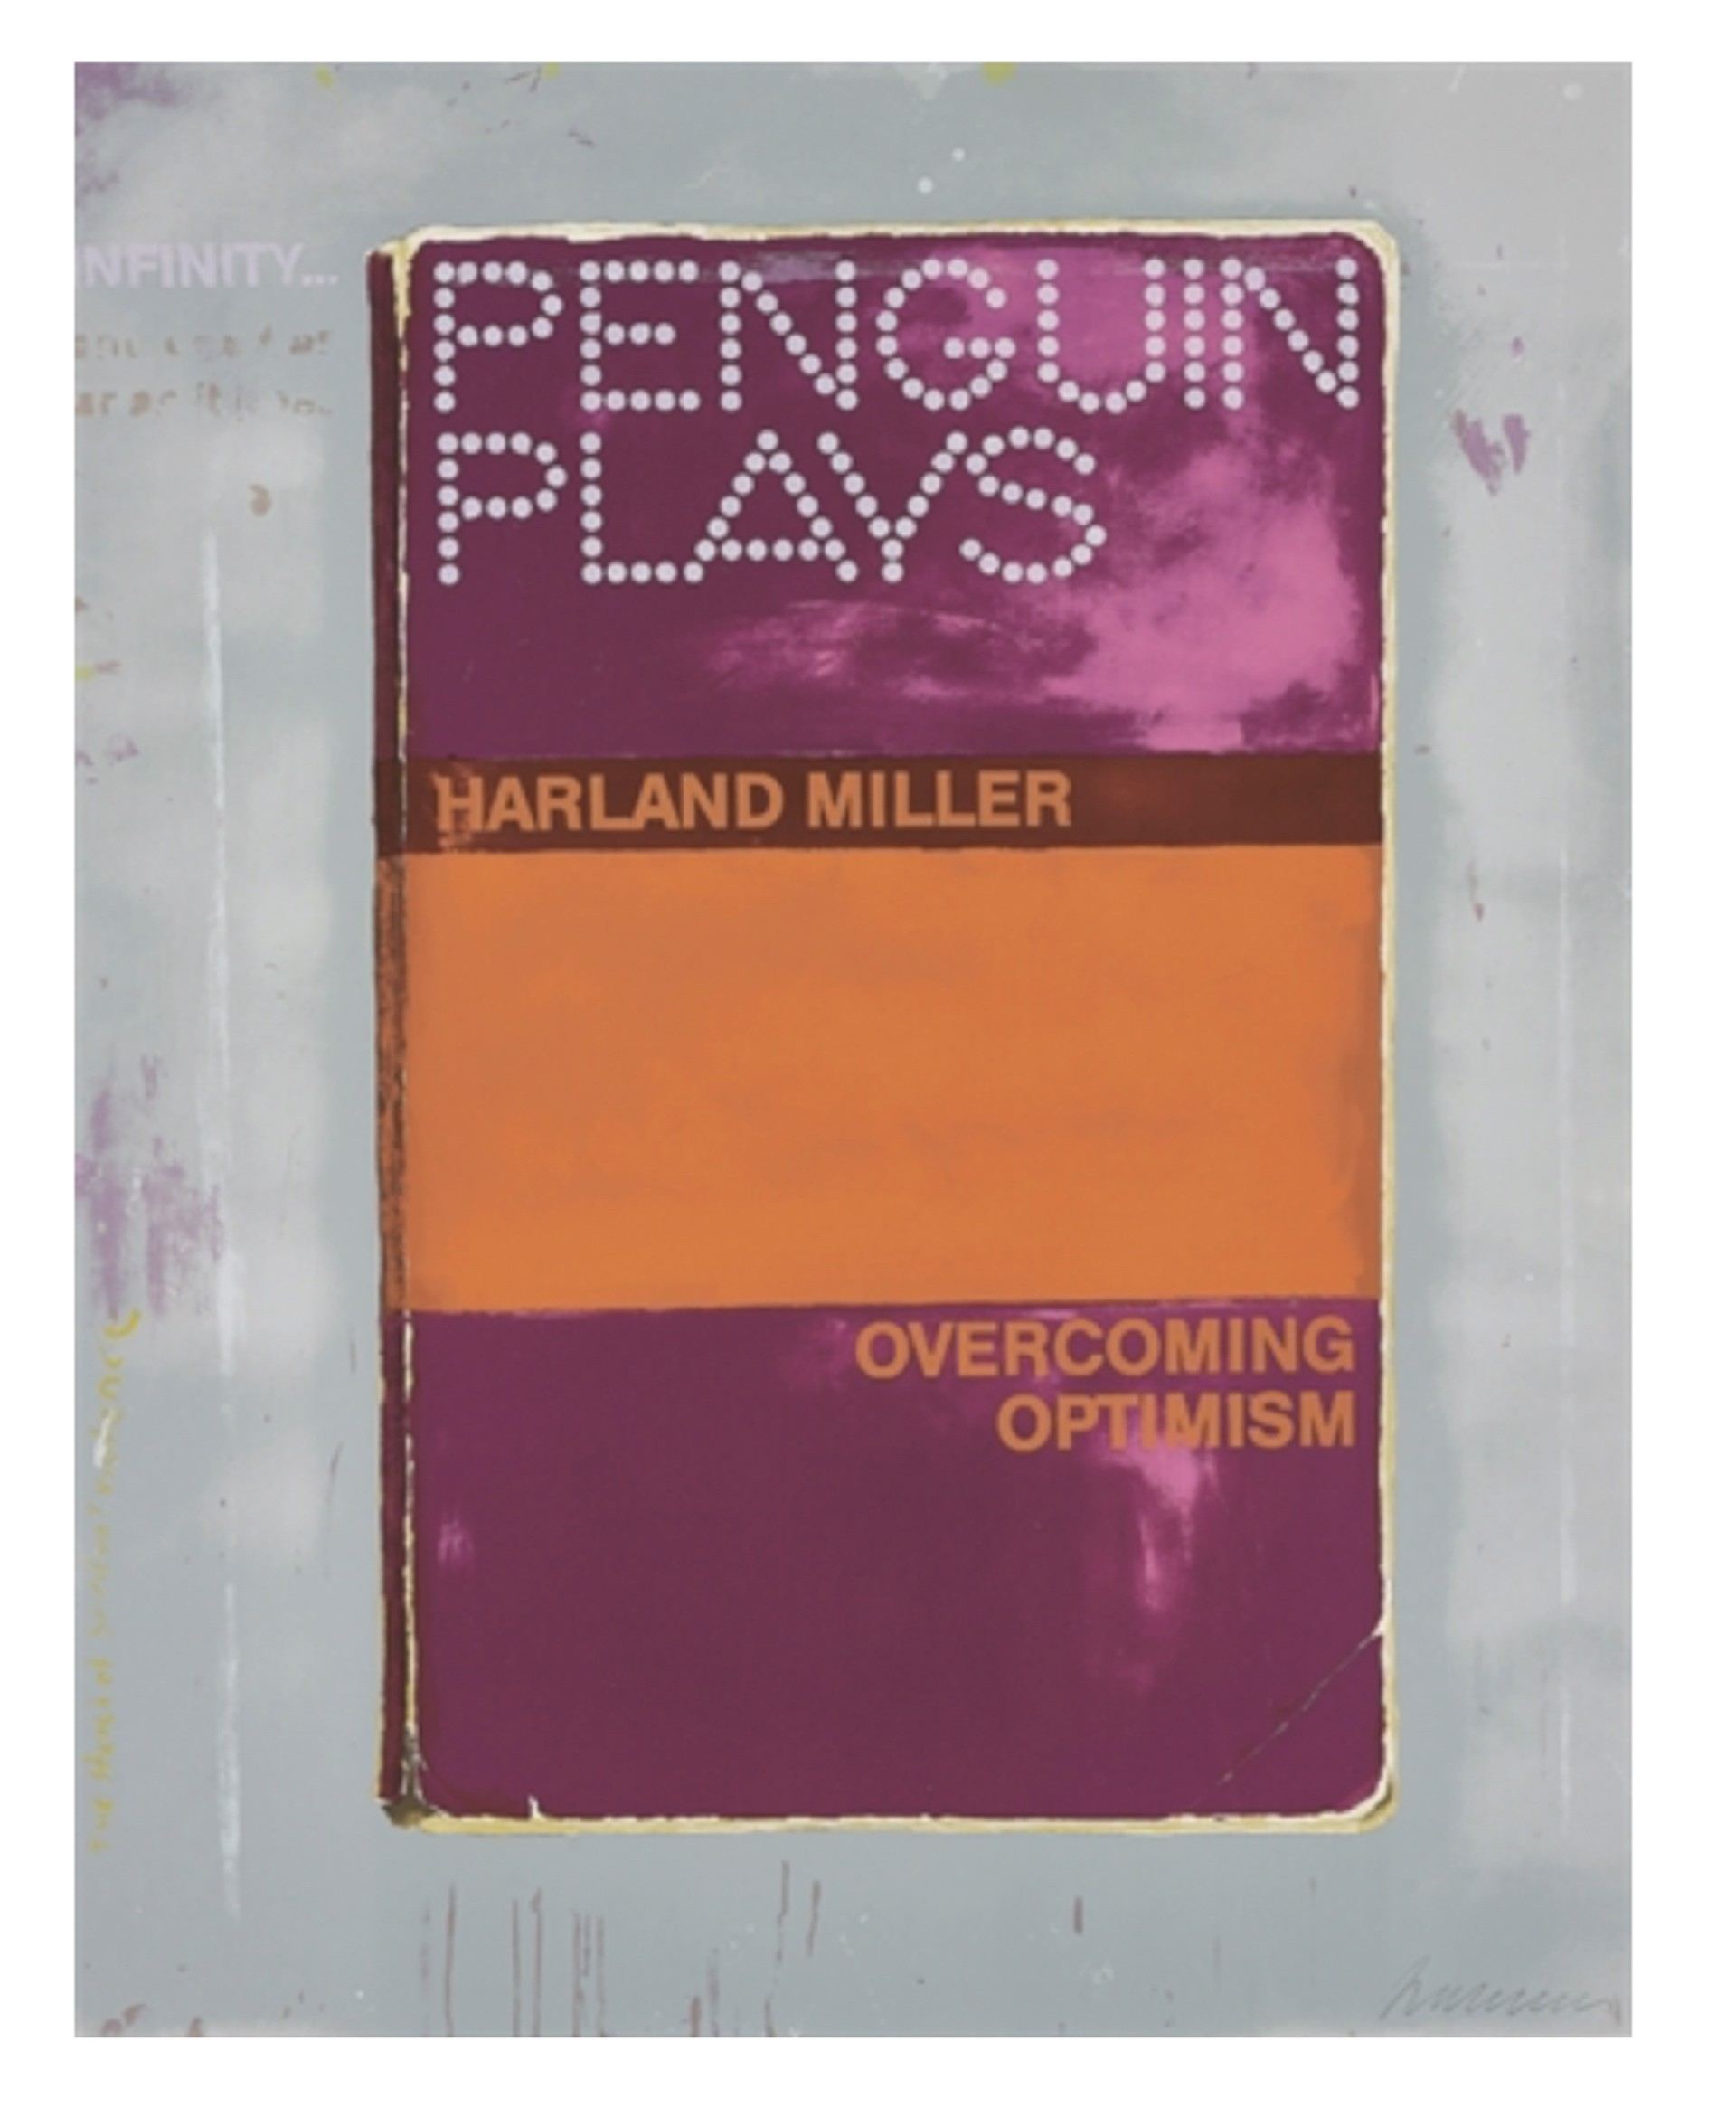 Overcoming Optimism by Harland Miller